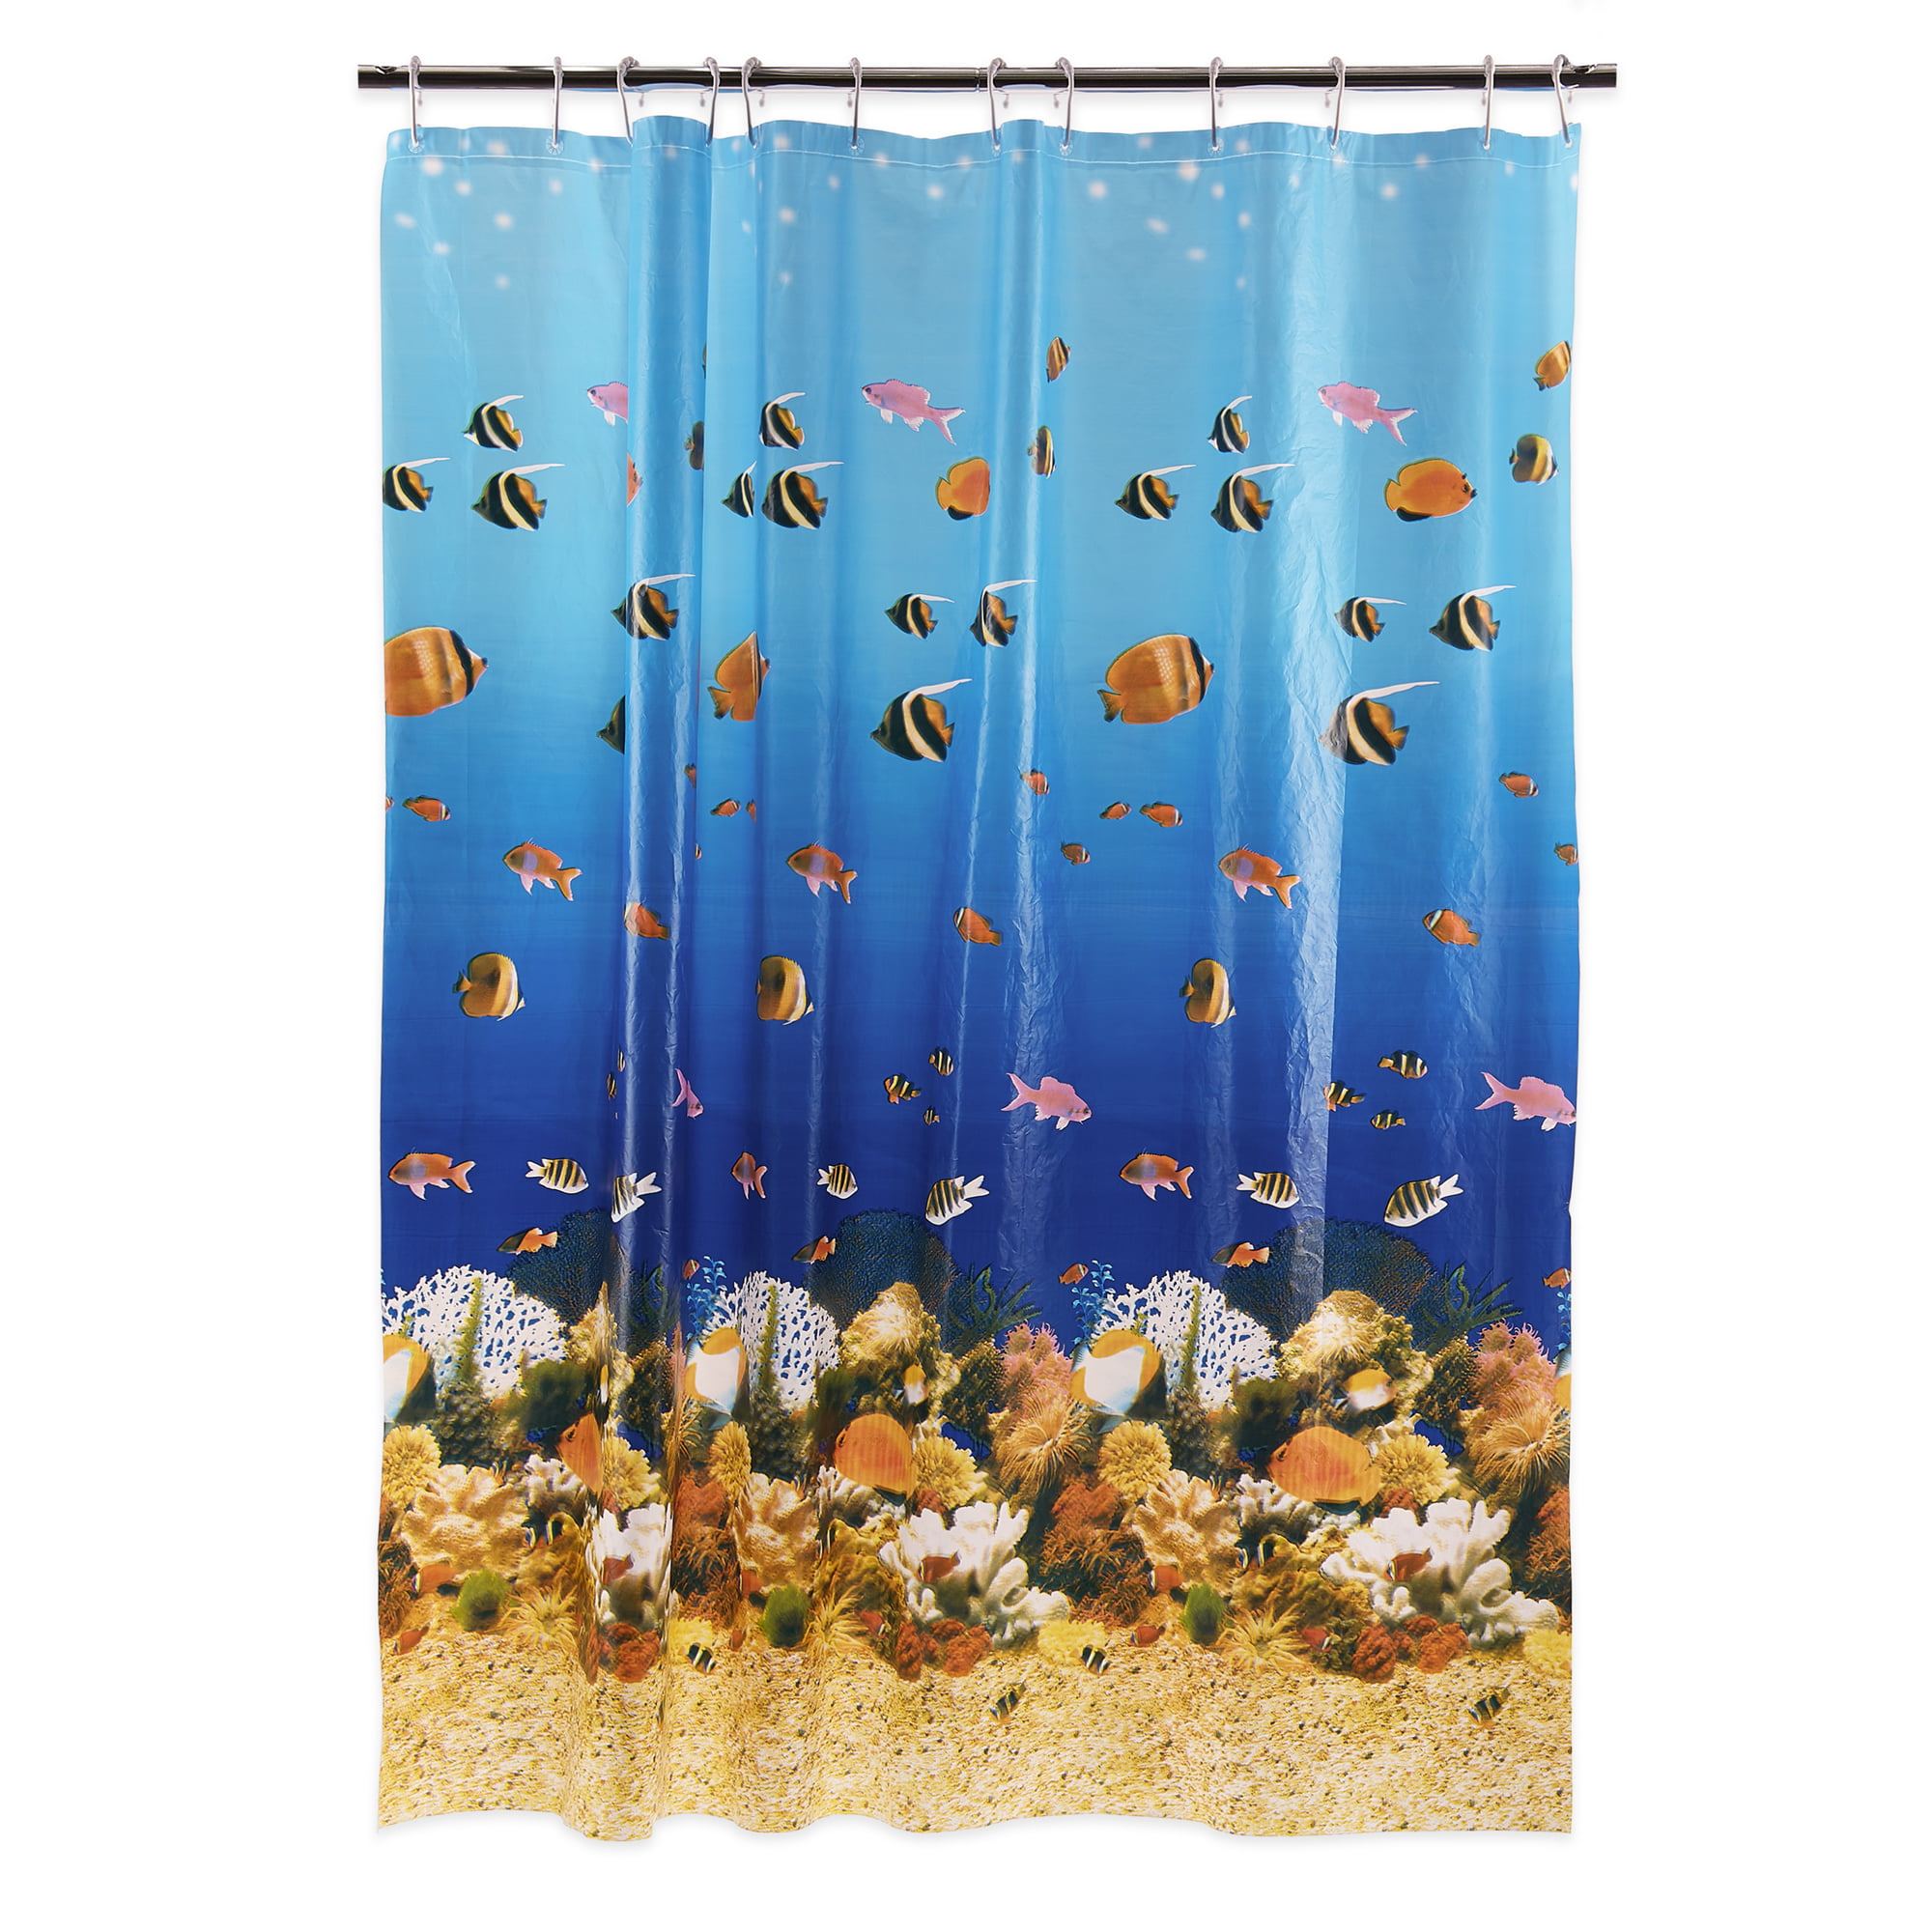 Polyester Shower Curtain Liner 70x72, Do You Need A Liner With Polyester Shower Curtain